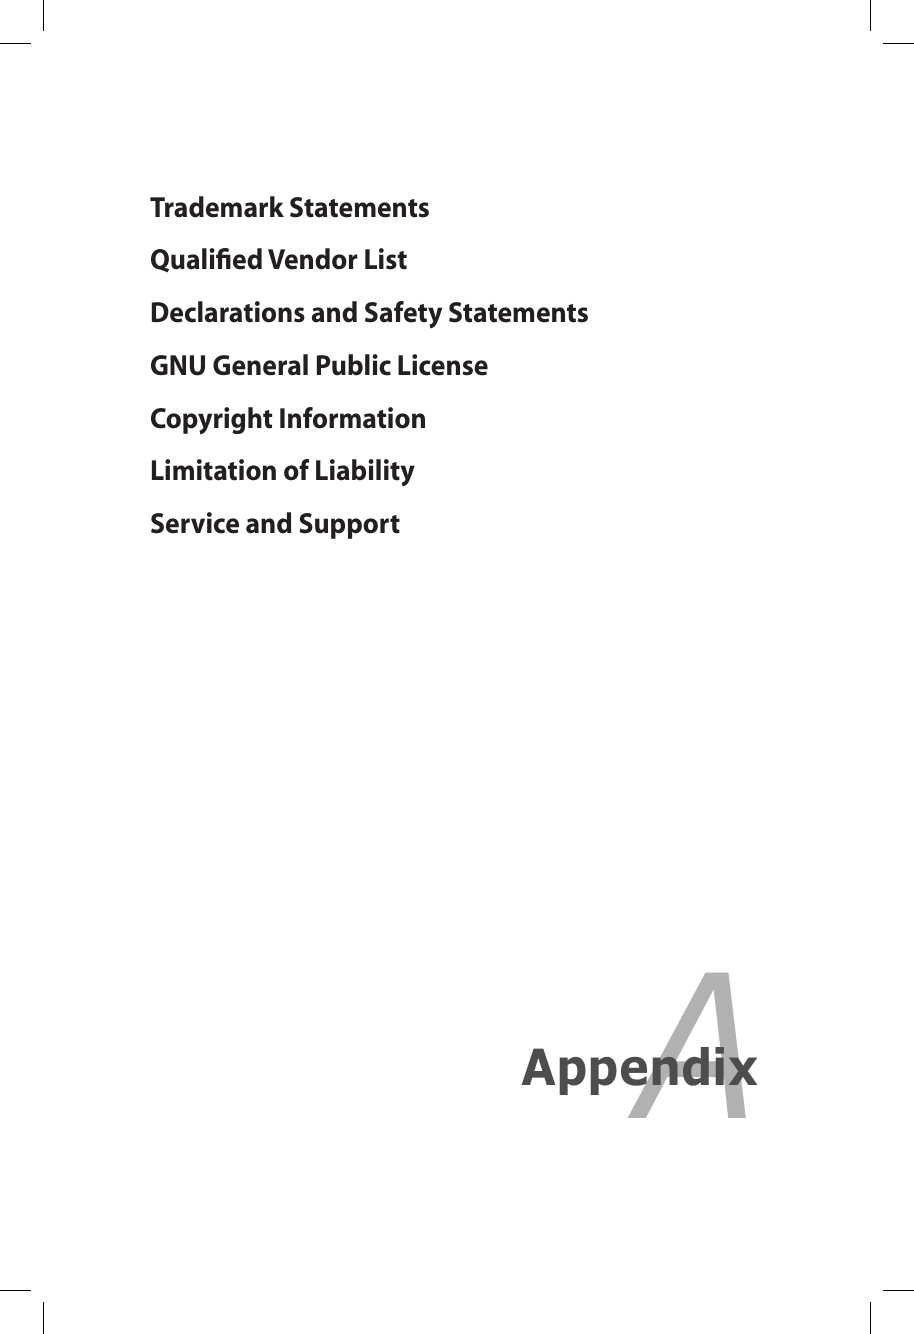 Trademark StatementsQualiﬁed Vendor ListDeclarations and Safety StatementsGNU General Public LicenseCopyright InformationLimitation of LiabilityService and SupportAAppendix